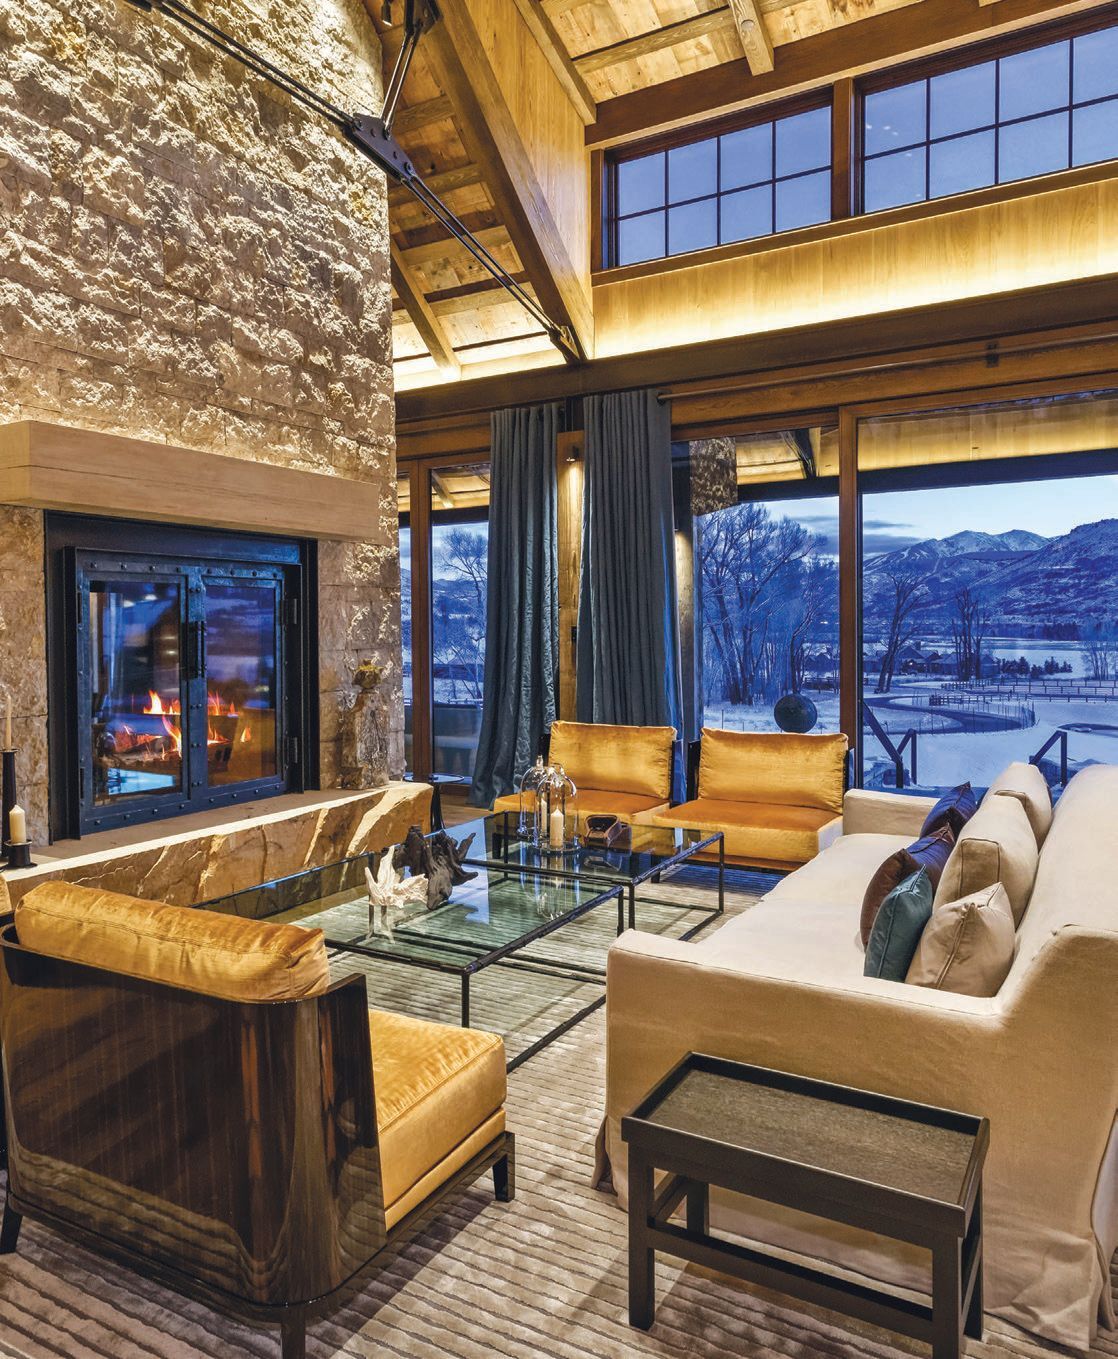 Each home offers spacious living areas with fireplaces and high ceilings featuring windows that maximize views PHOTO COURTESY OF THE RESIDENCES OF ASPEN VALLEY RANCH